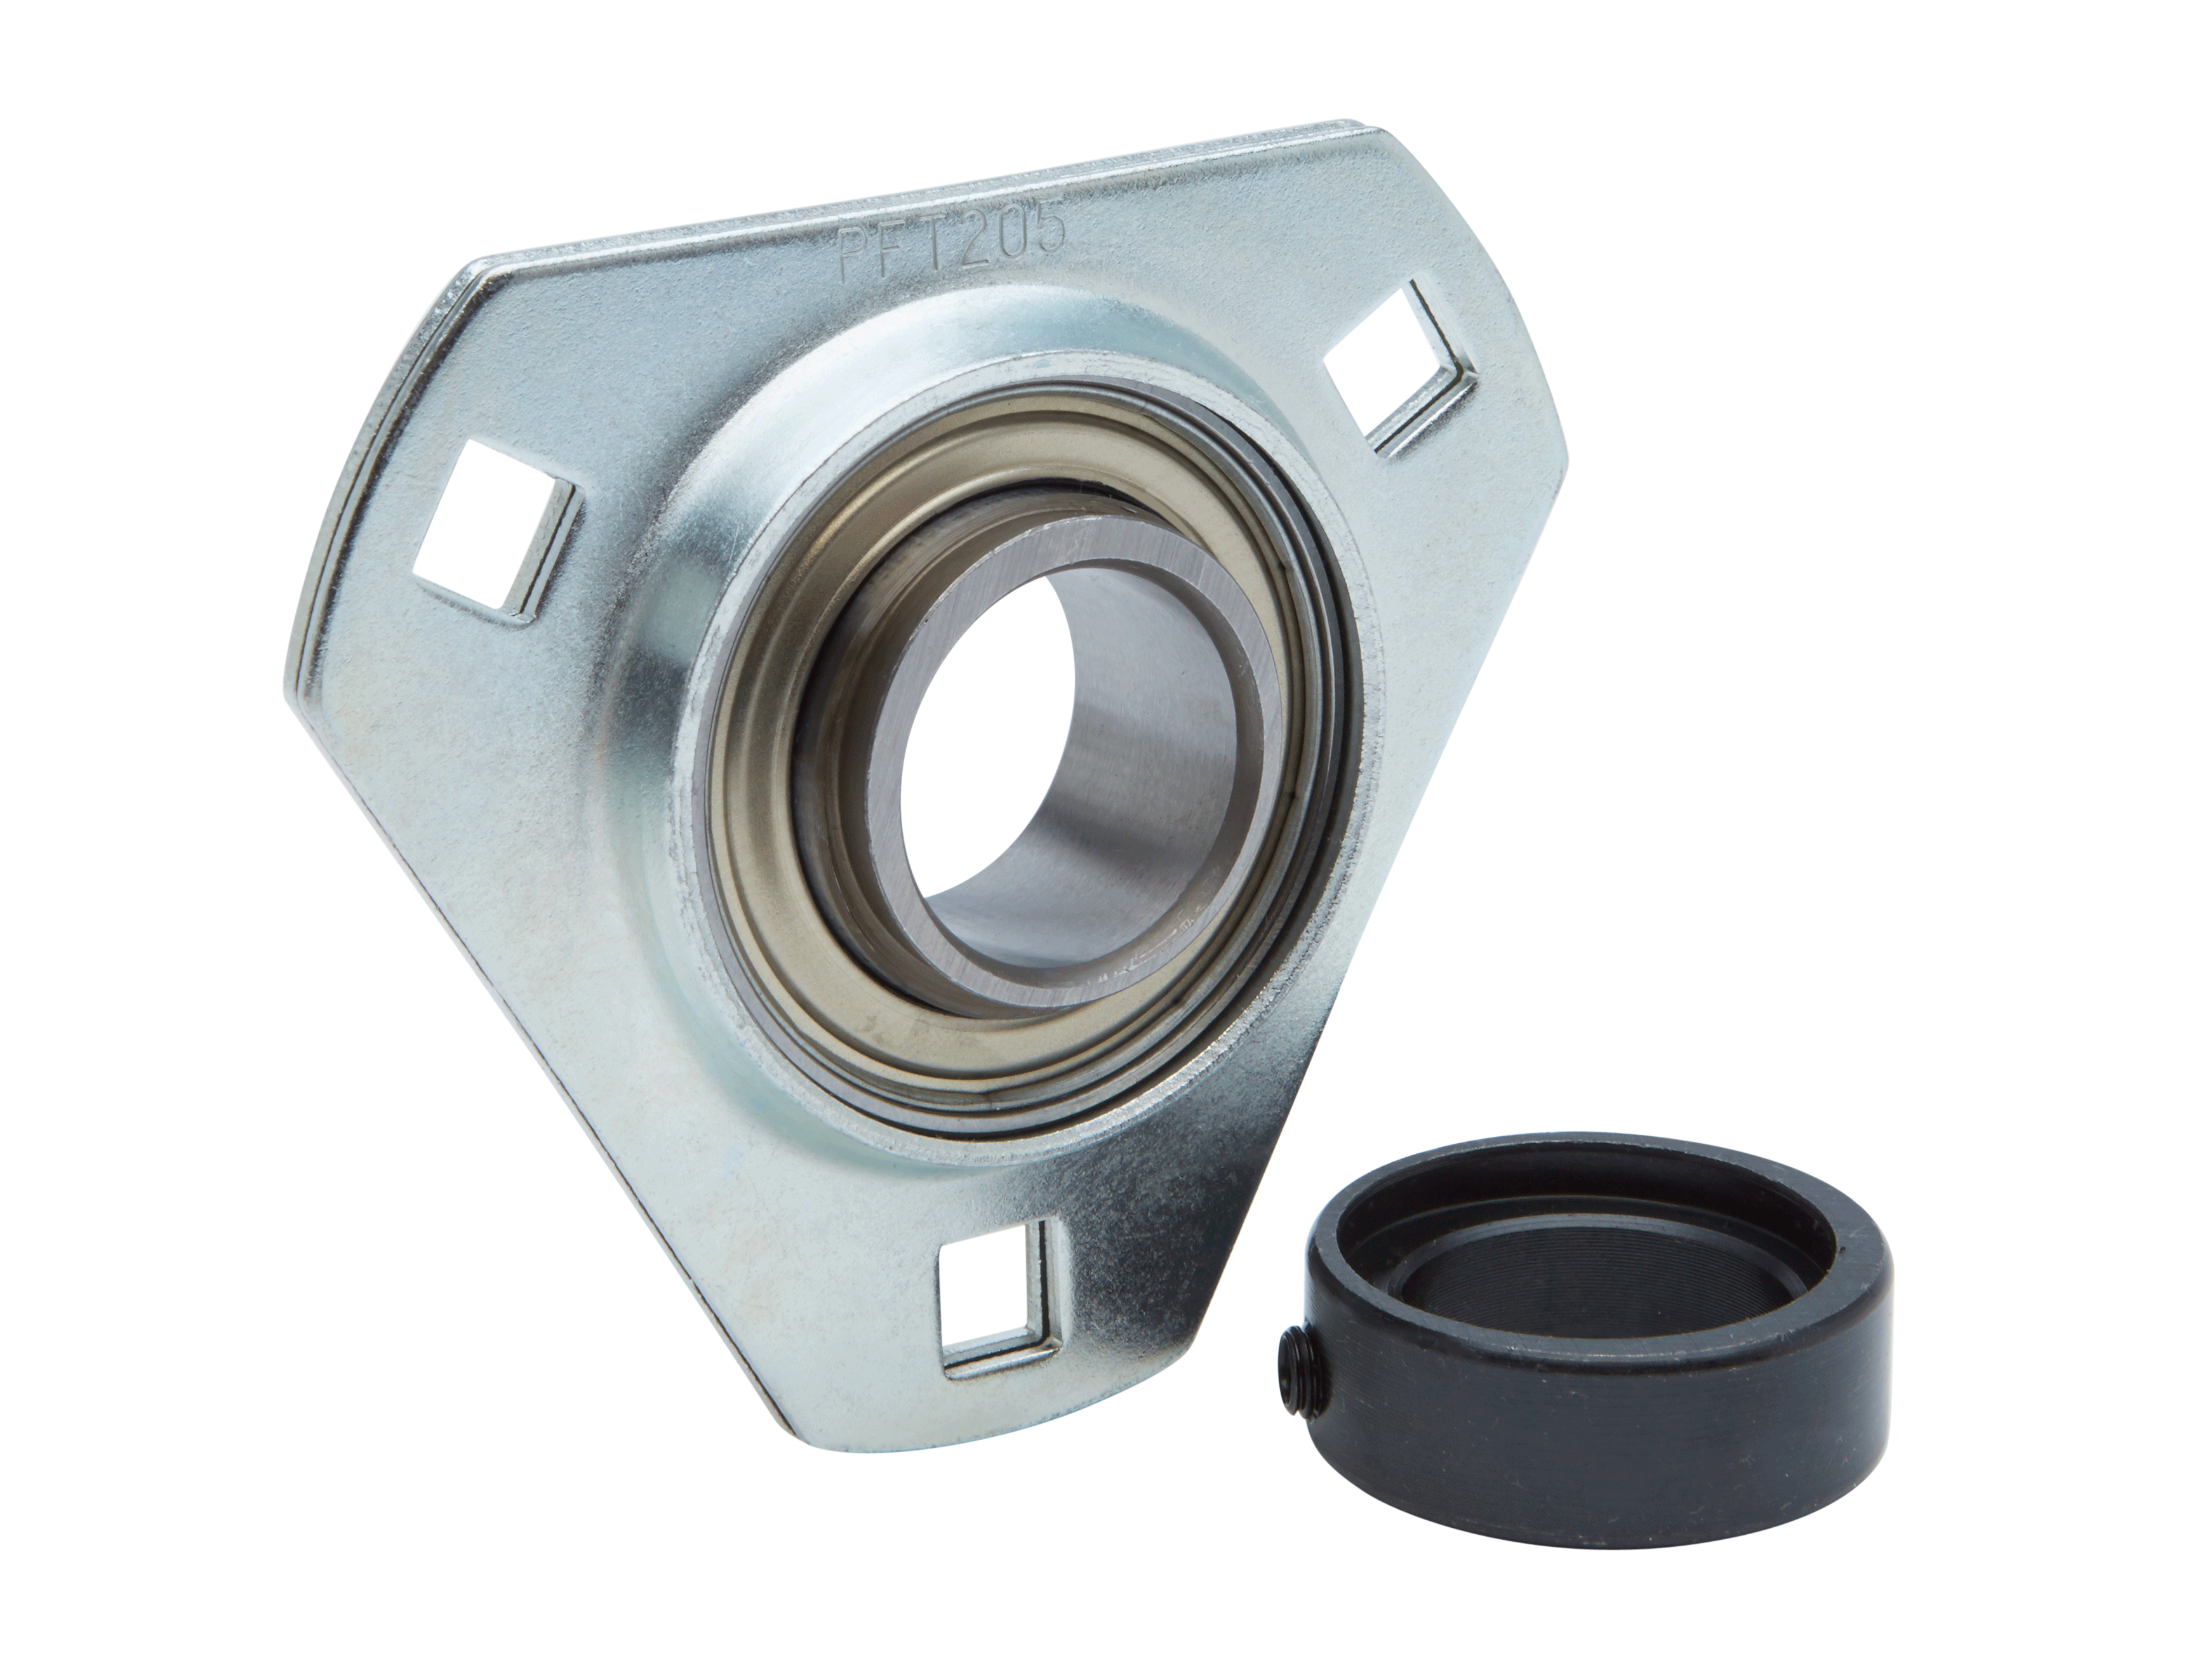 Big Bearing 19311308 Type E Four Bolt Flange Bearing 51 lb 4-1/2 Thickness 9-1/4 Length V-Guardnitrile Contact Seal 3-1/2 Shaft Size Iron/Steel/Nitrile/Teflon 3-1/2 Shaft Size 9-1/4 Length 4-1/2 Thickness Moline Bearing Co